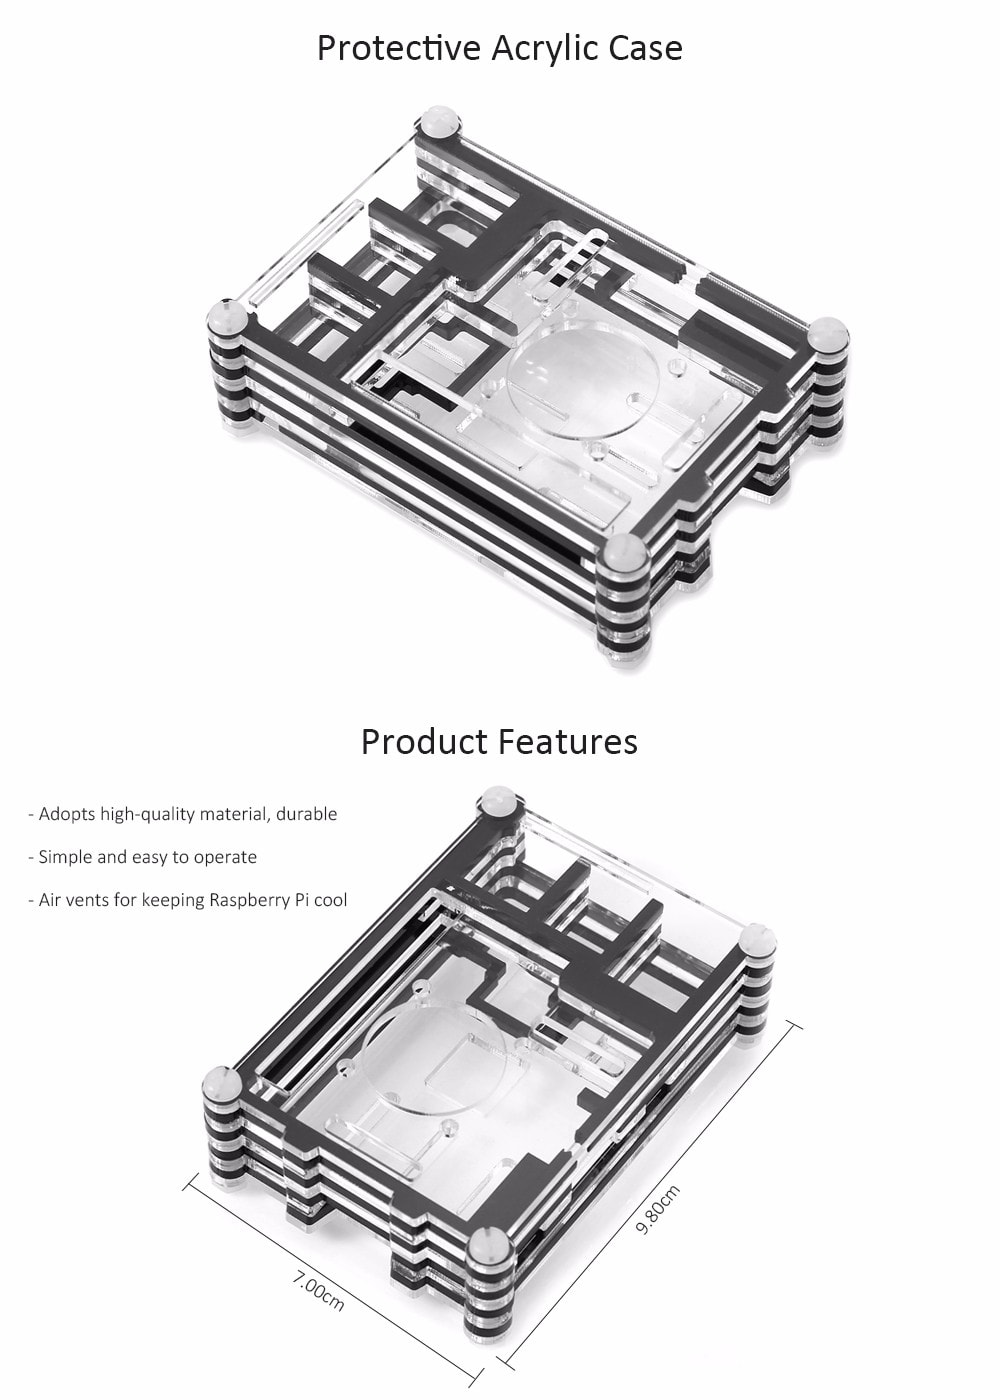 Protective Acrylic Case Protective Enclosure for Raspberry Pi 2B / B +- Transparent